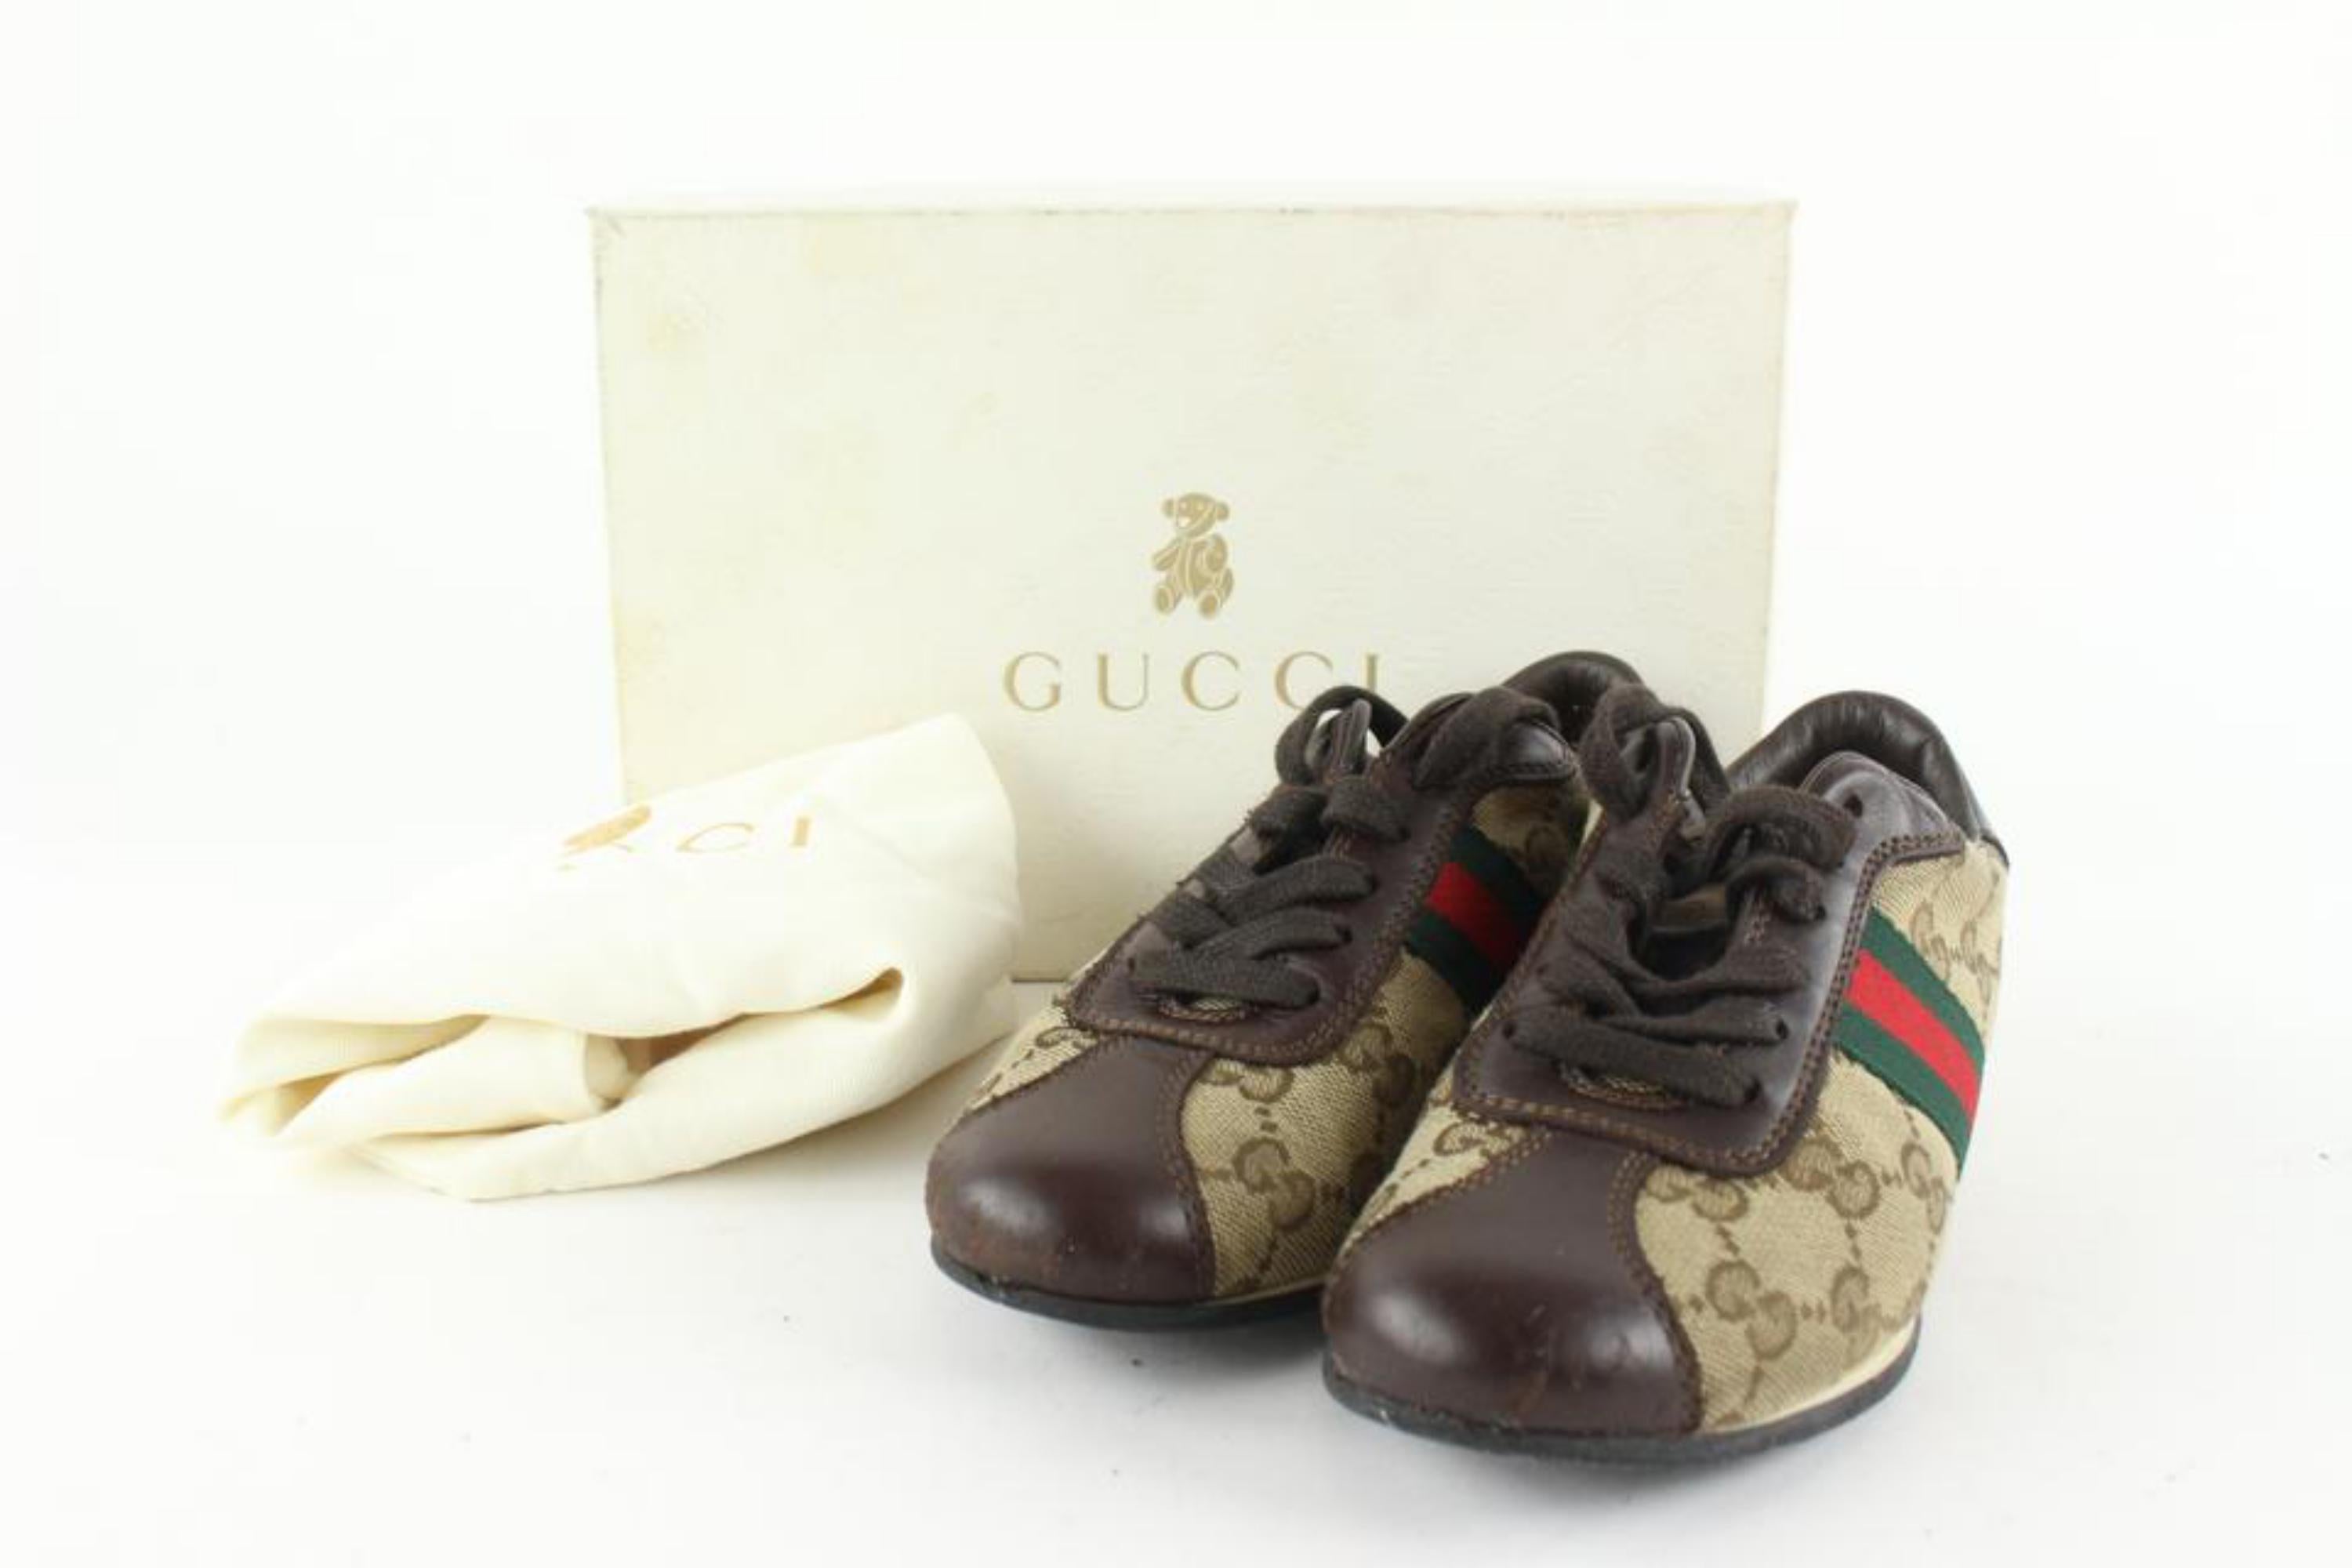 Gucci 1.5 US Kids Size Monogram GG Web Sneaker 322G1G
Date Code/Serial Number: 257826
Made In: Italy
Measurements: Length:  8.5